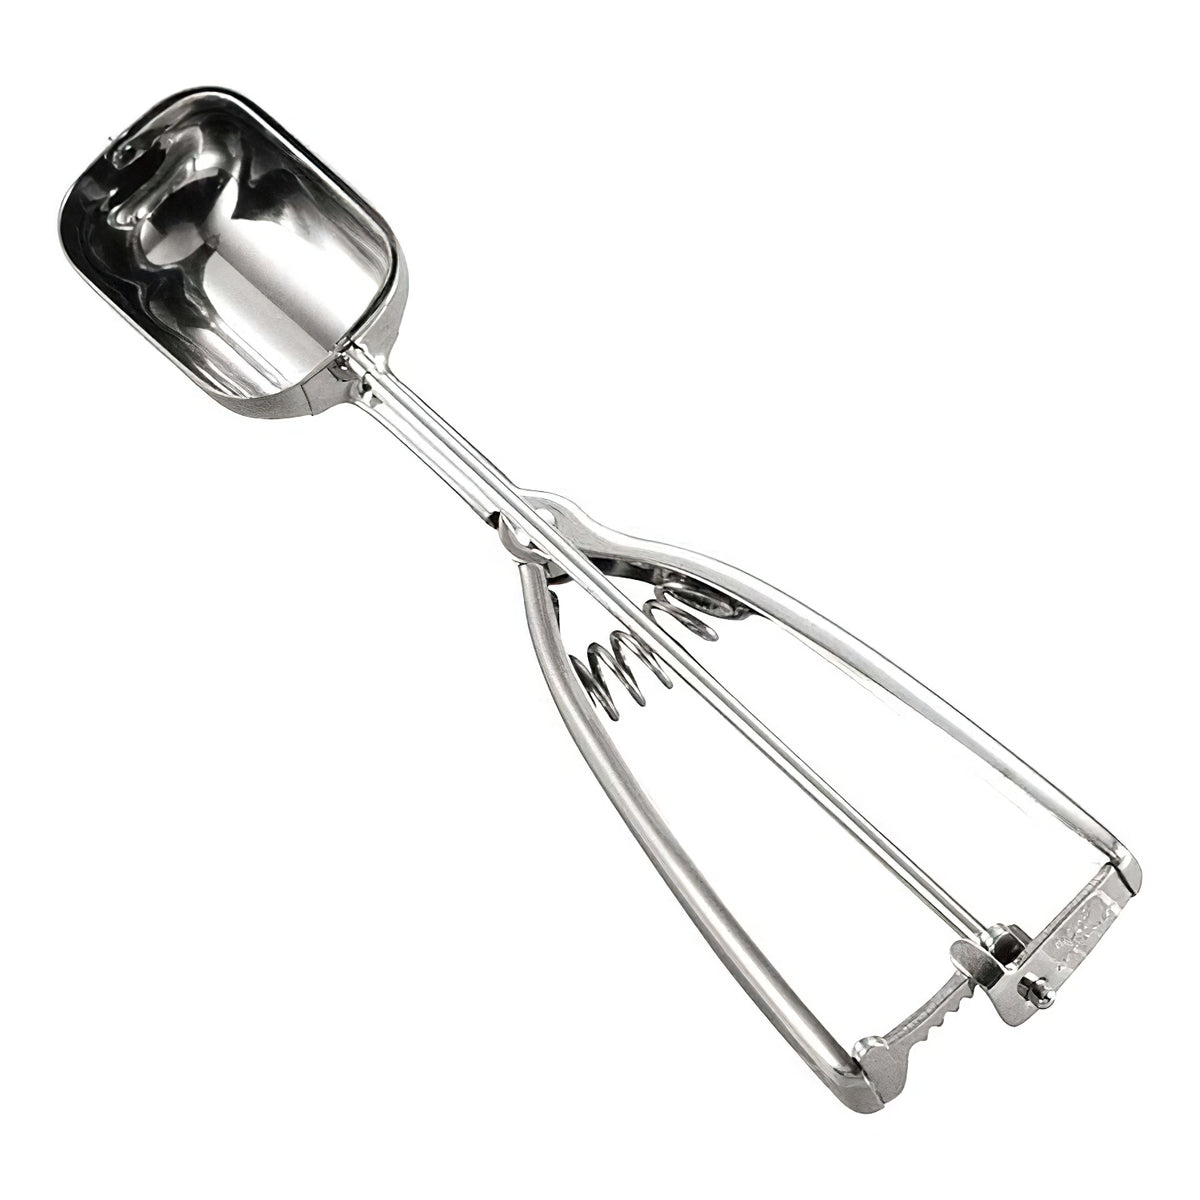 GS Stainless Steel Oval-Shaped Ice Cream Scoop